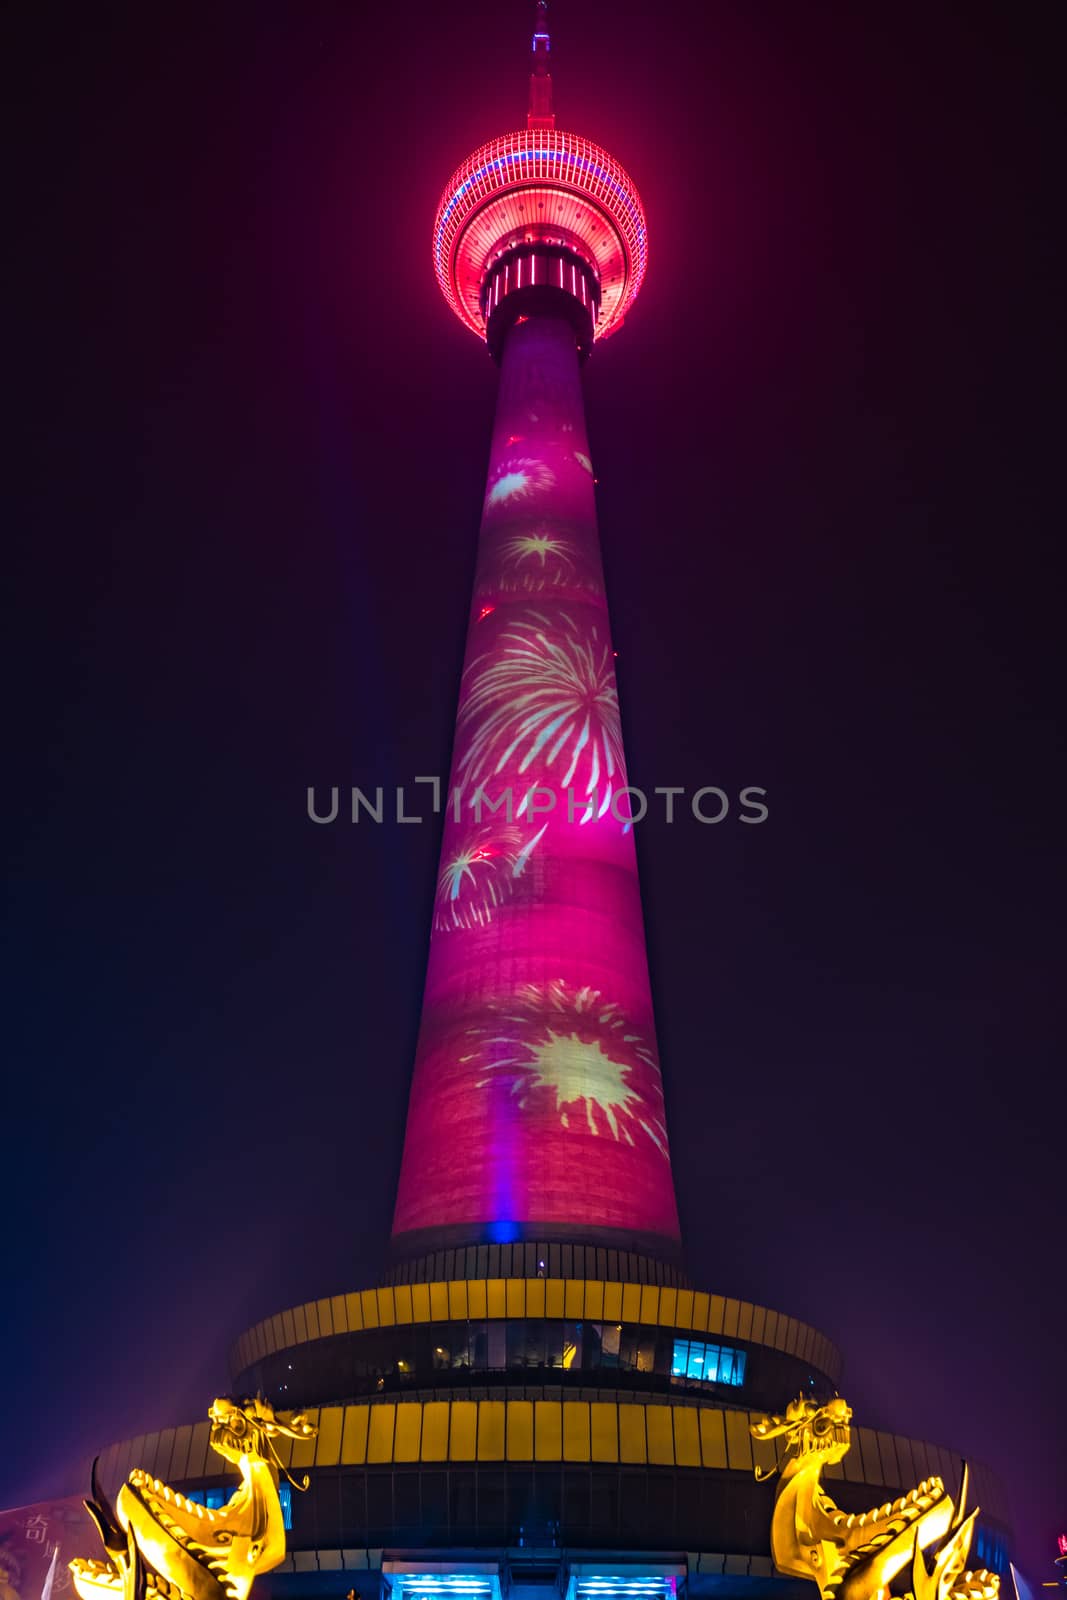 The Central Radio and Television Tower at night with colorful illumination, Beijing, China.